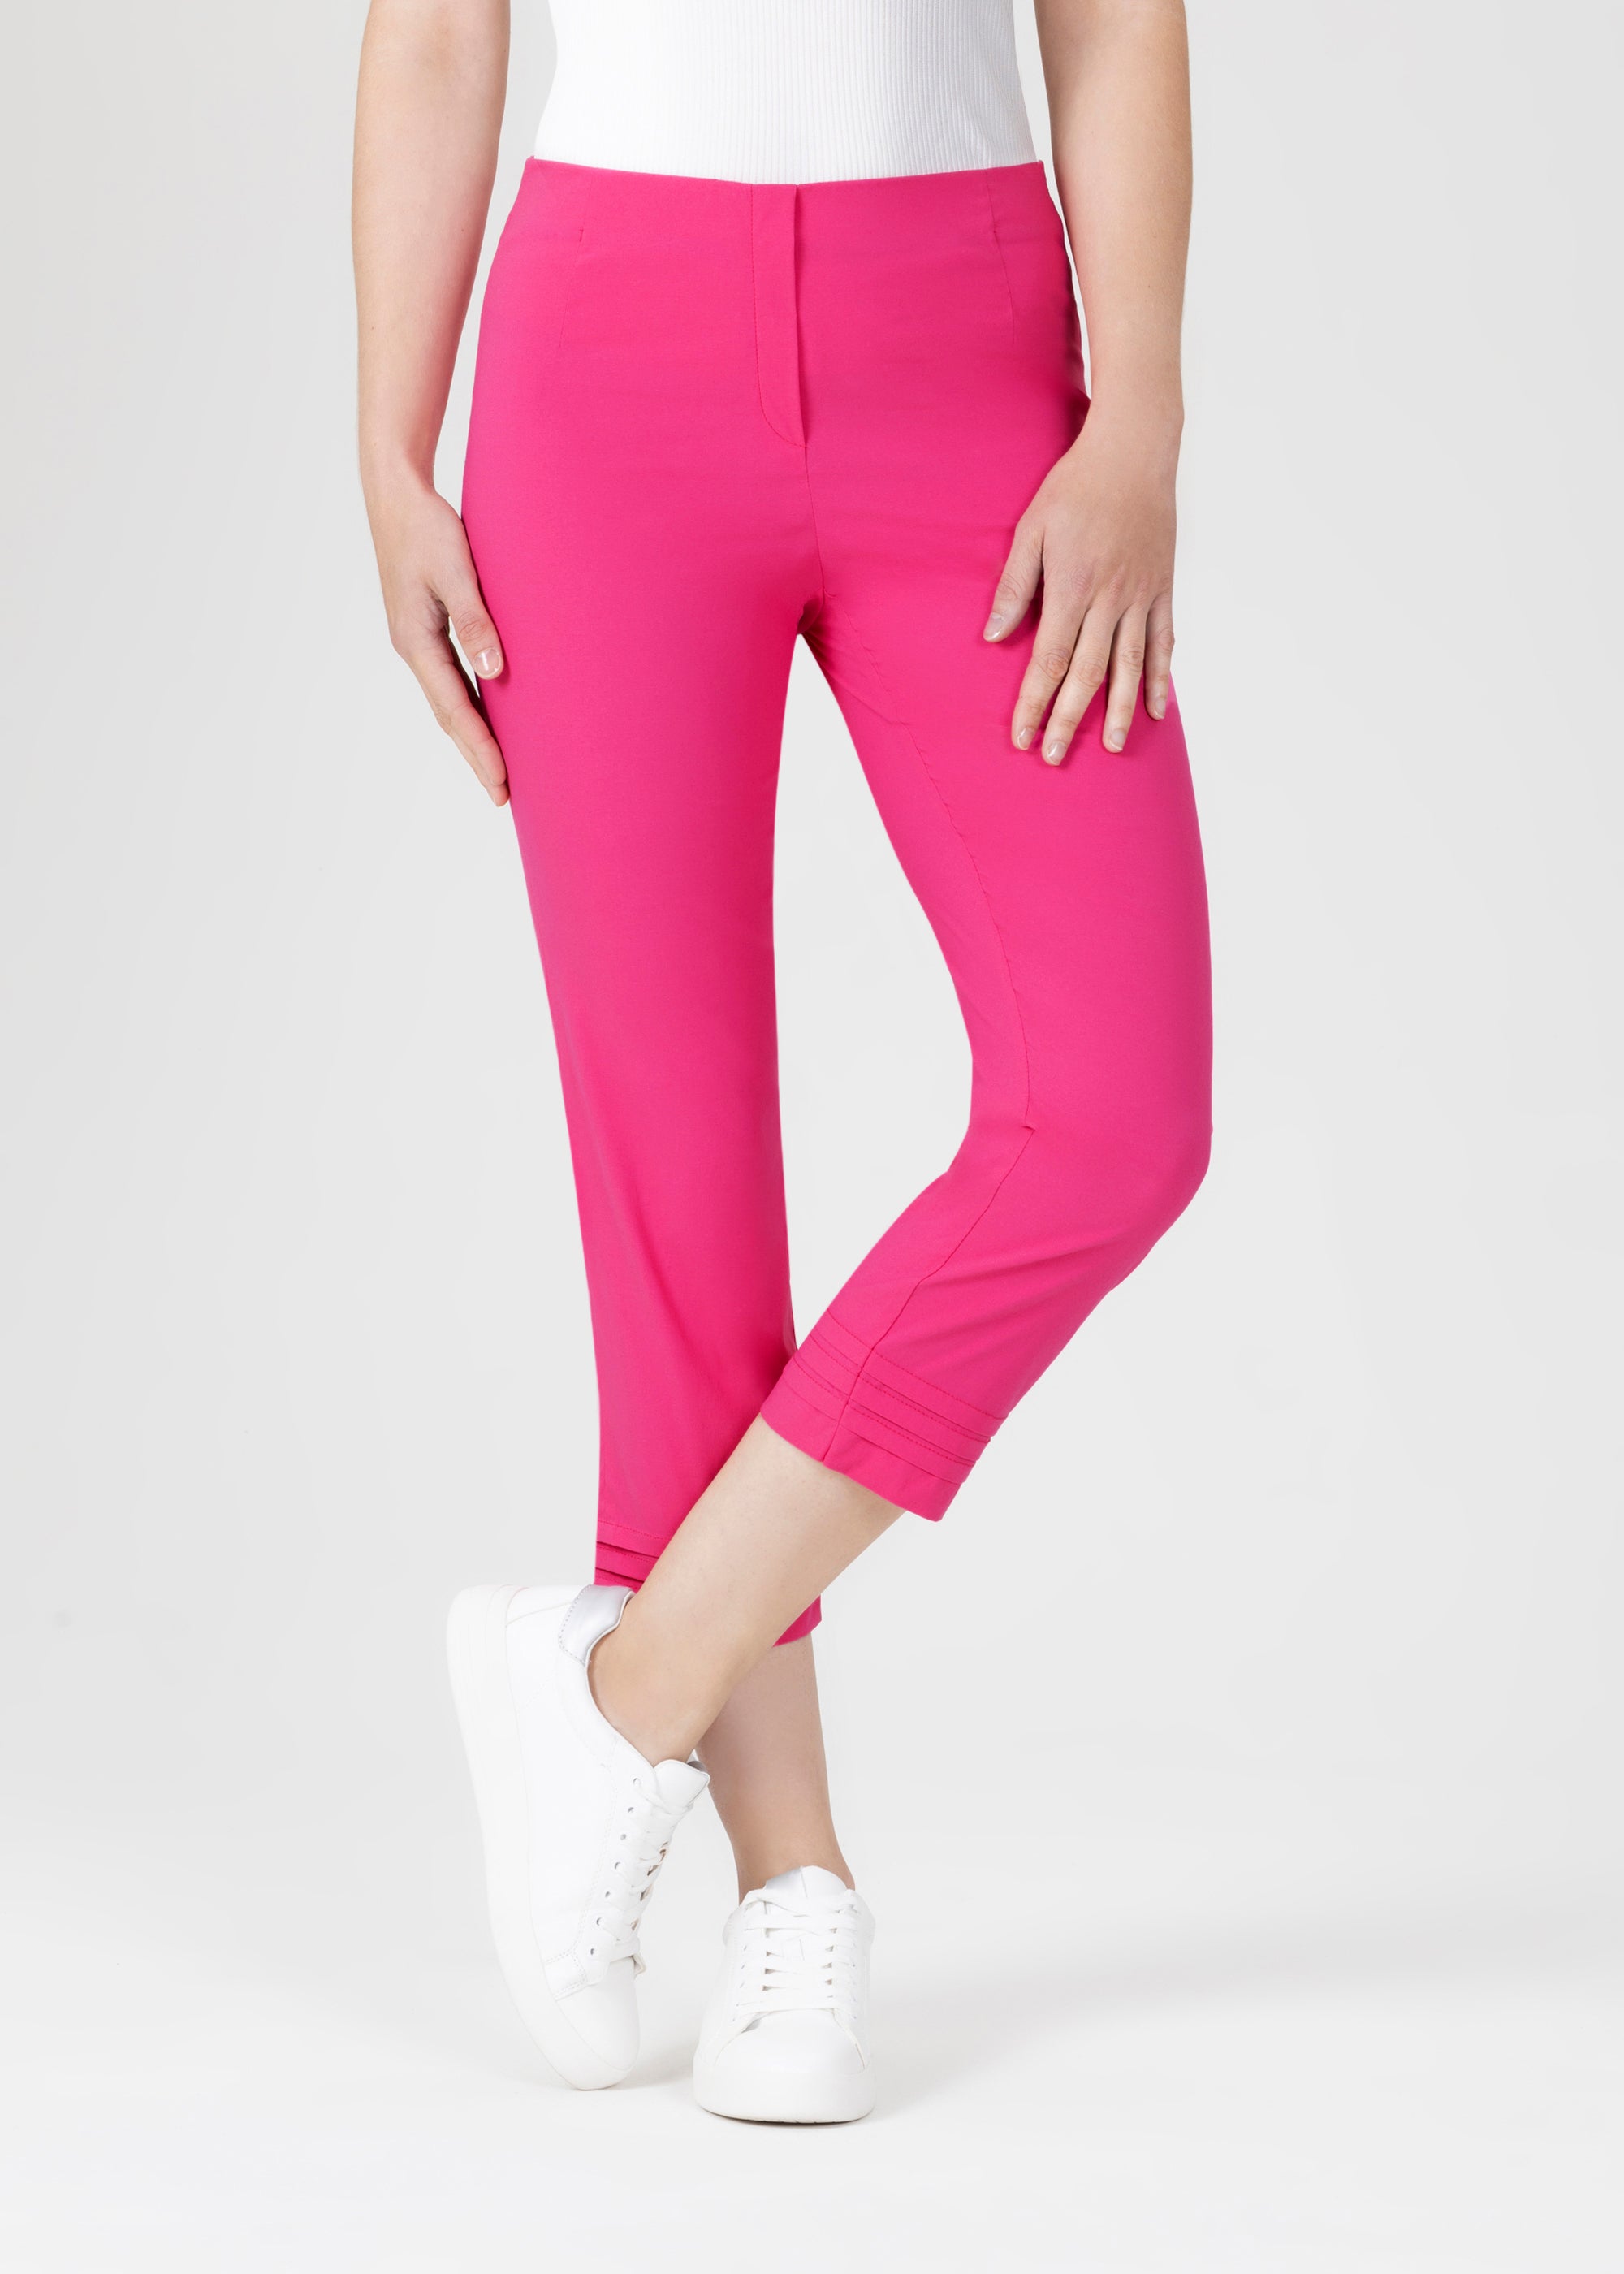 6/8-Hose Ina OFFICIAL in ONLINE Stehmann-store.com SHOP Sommer – in Bengaline | pink